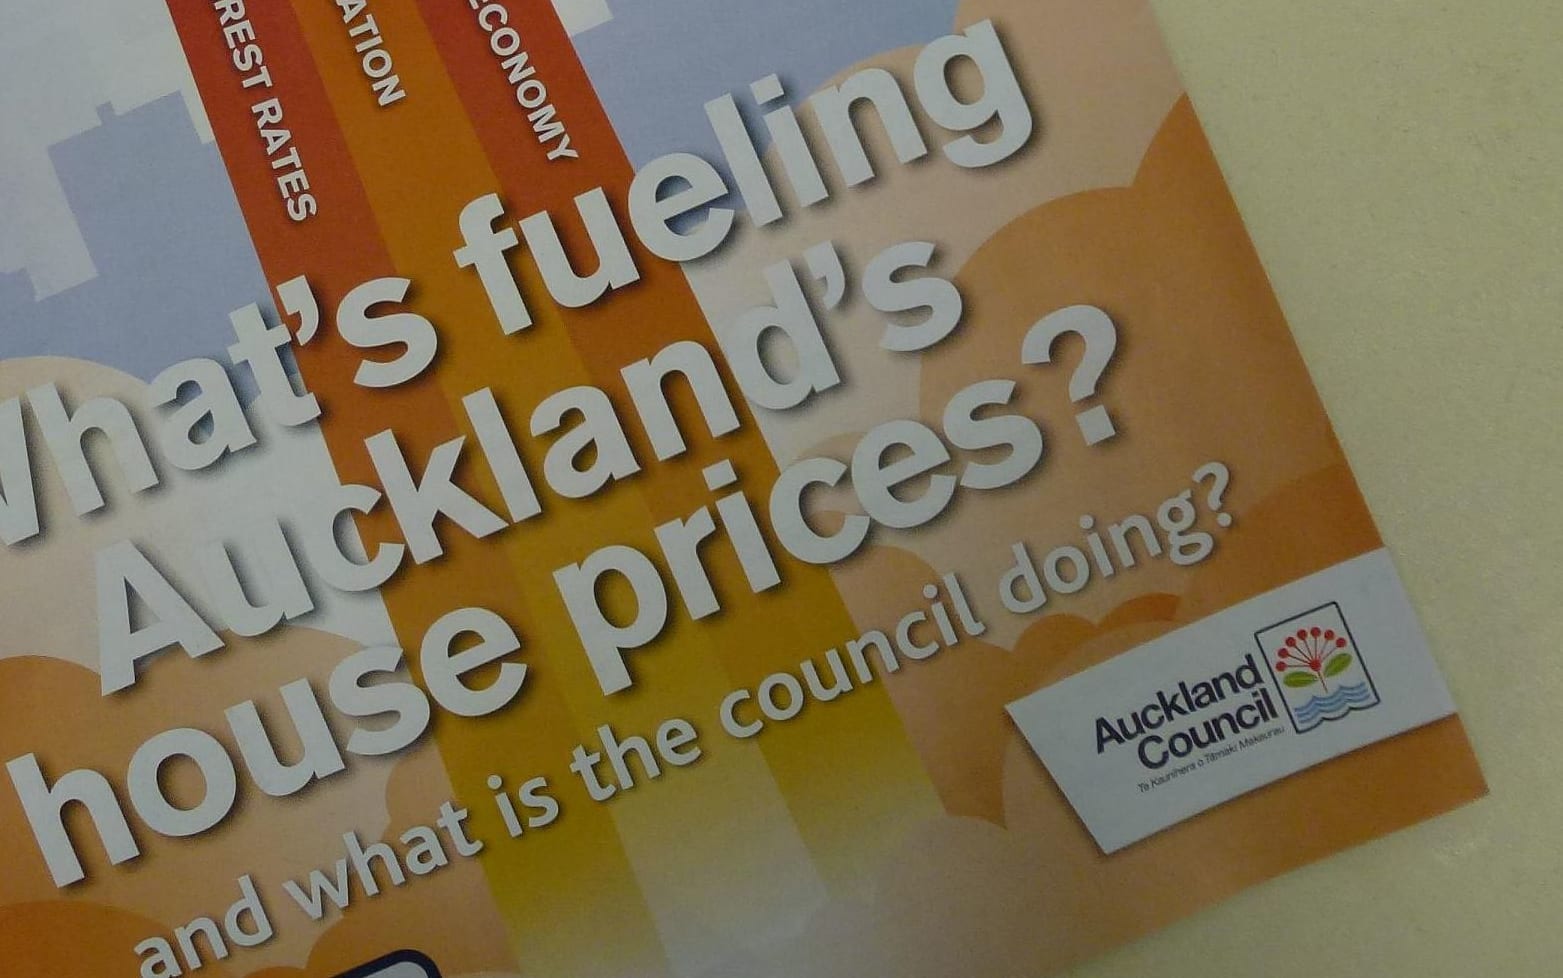 Auckland Council can't spell